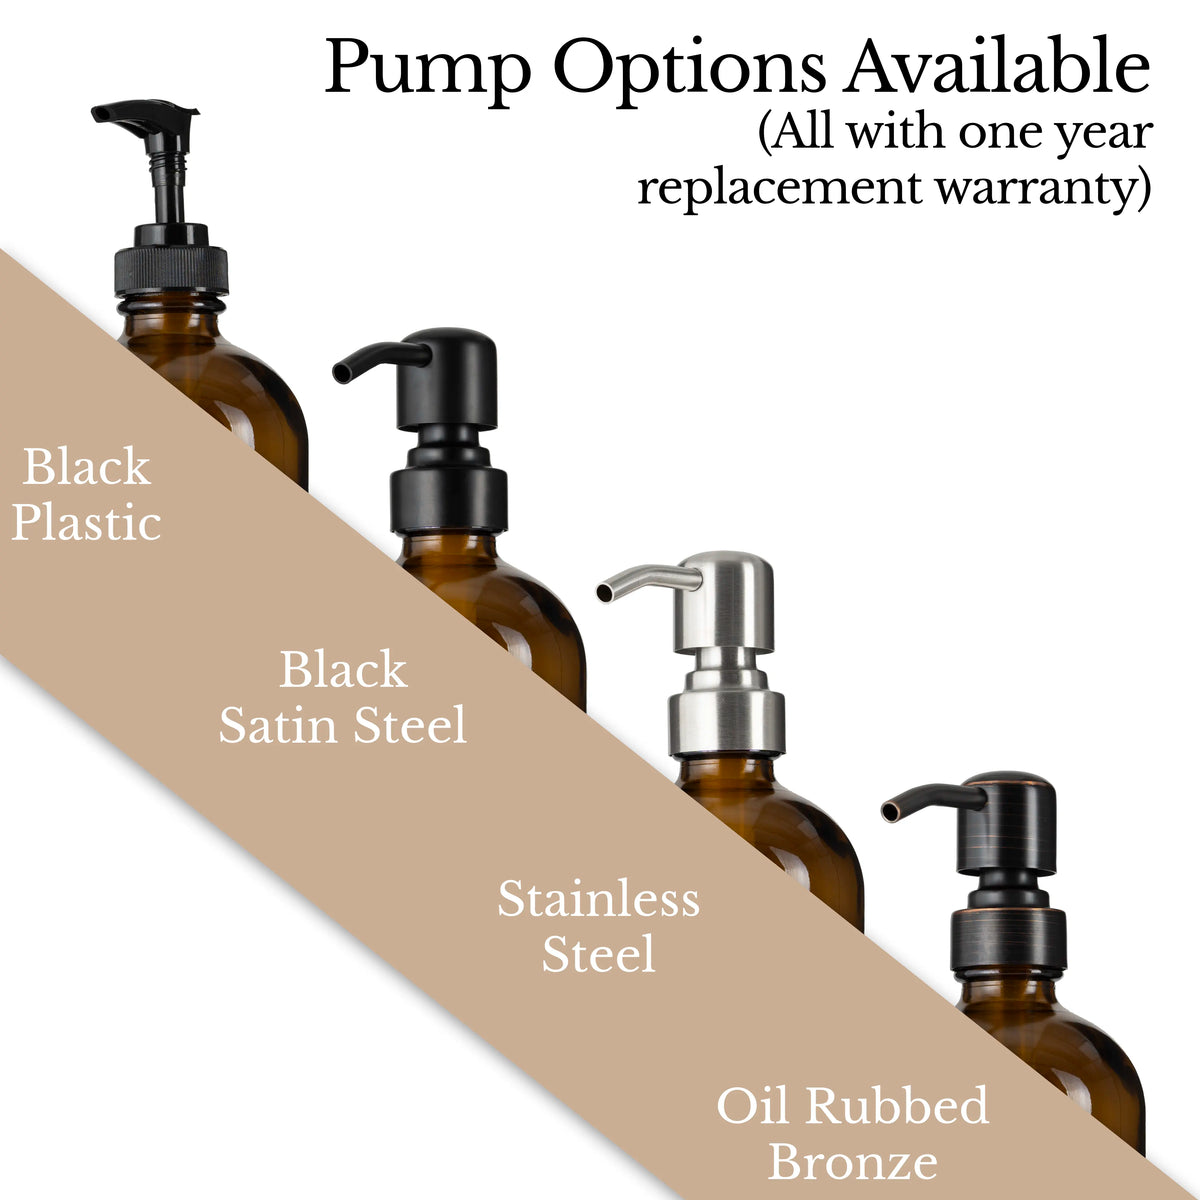 Various stainless steel pumps, black, brushed nickel, and oil rubbed bronze, plus black plastic options with warranty